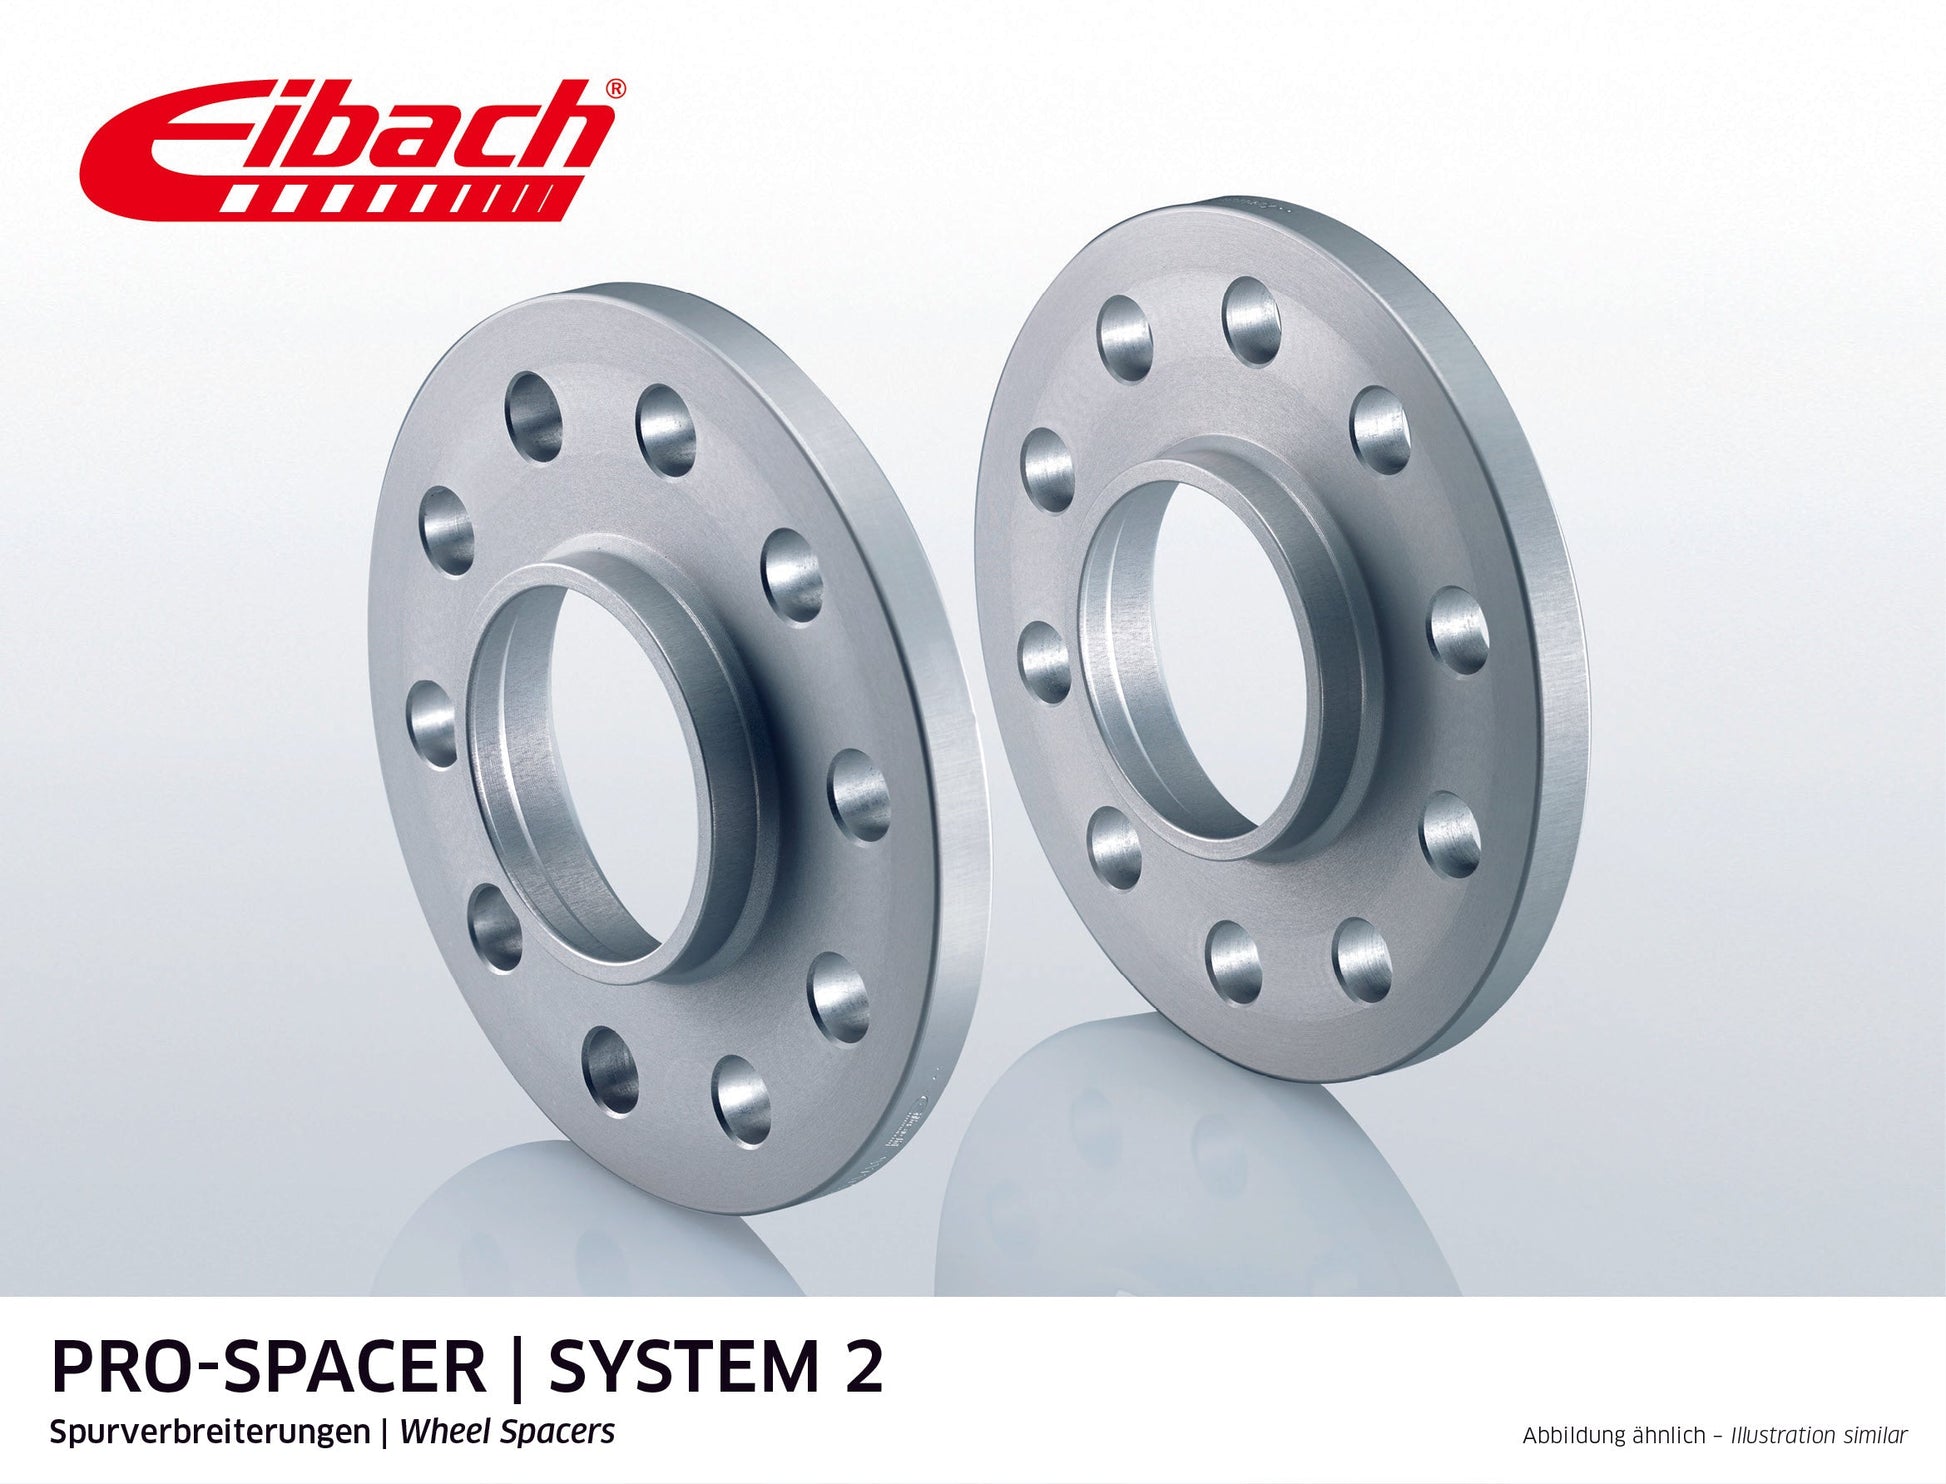 Eibach Pro-Spacer Kit (Pair Of Spacers) 10mm Per Spacer (System 2) S90-2-10-004 (Silver) at £103.59